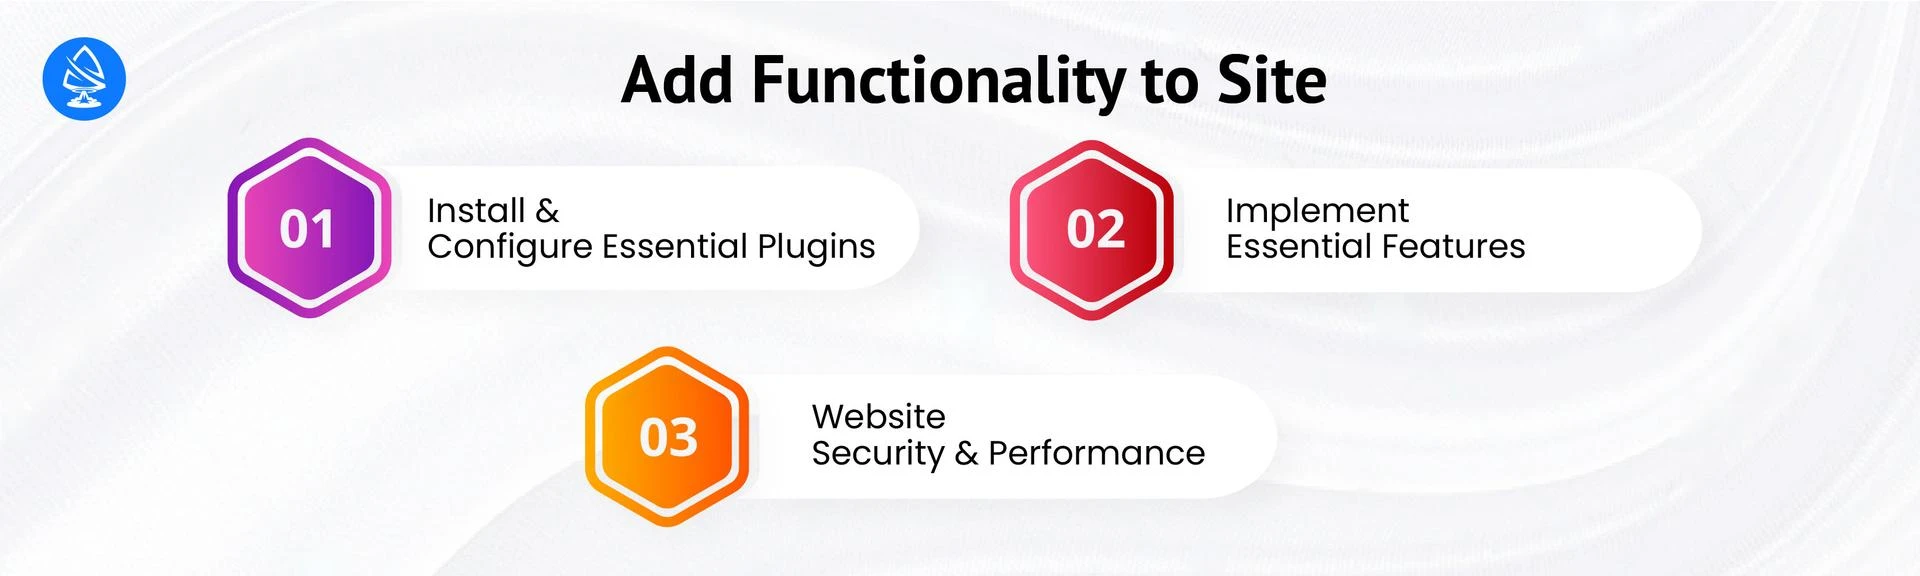 Adding Functionality to Your Website 